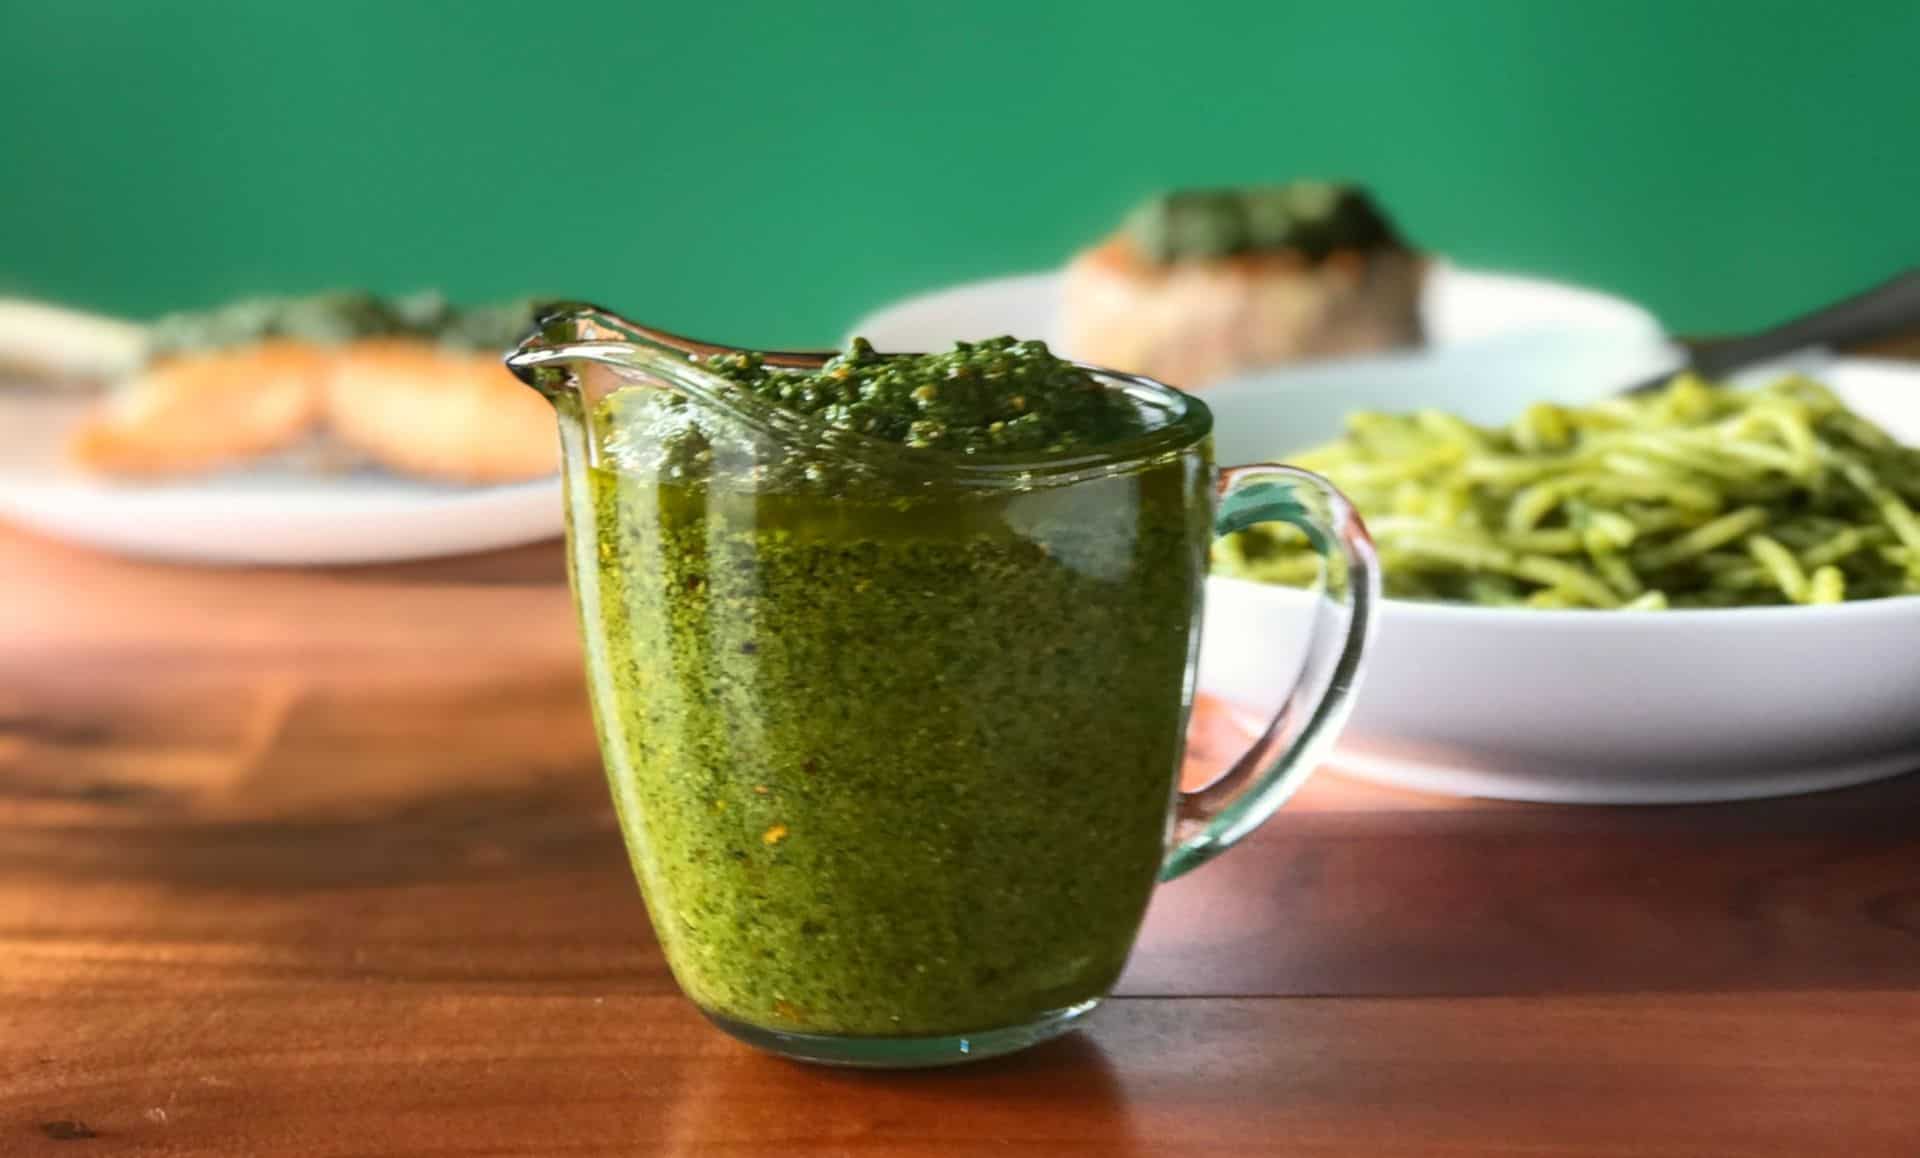 pistachio pesto made with arugula in a small glass pitcher on a wooden table